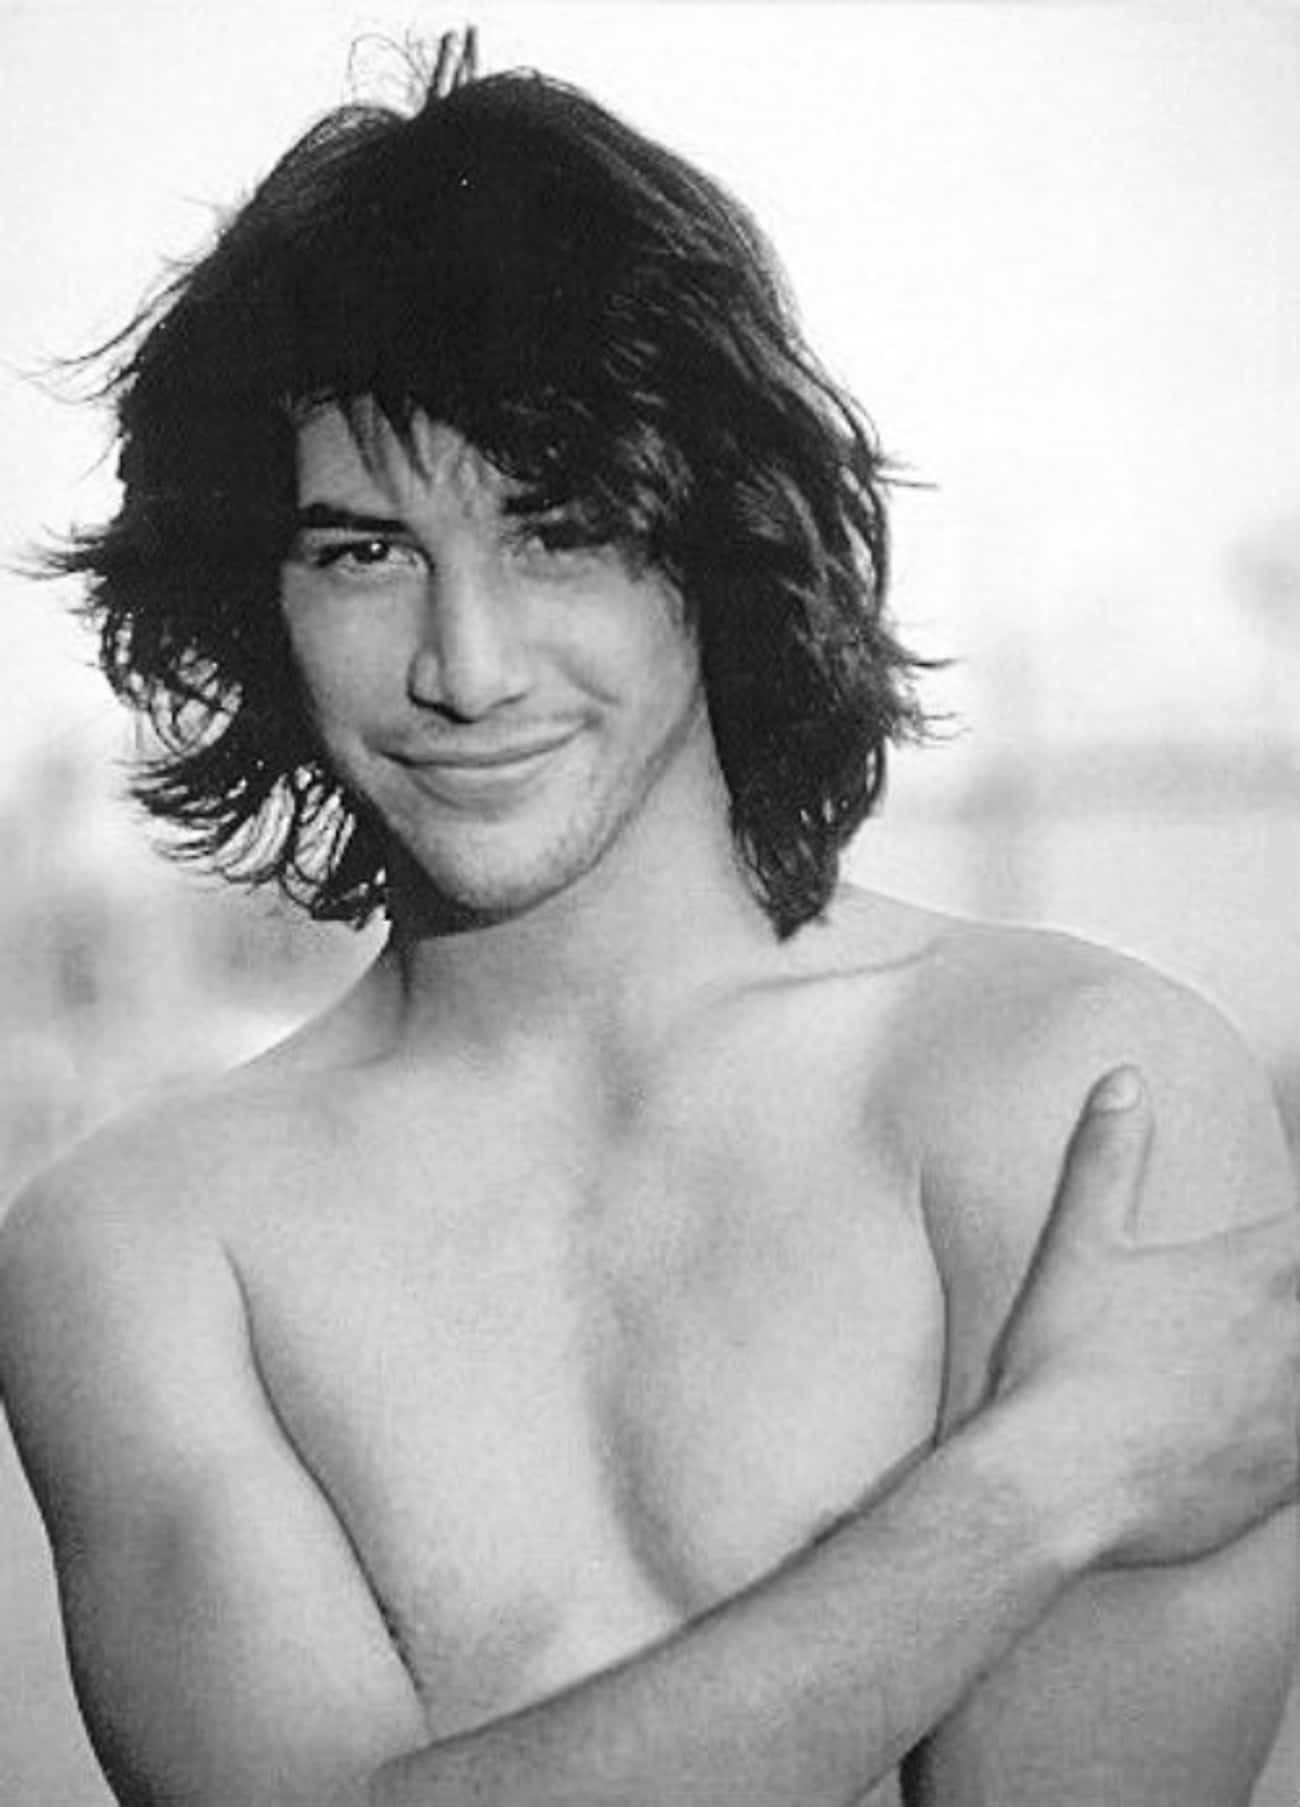 Young Keanu Reeves With No Shirt